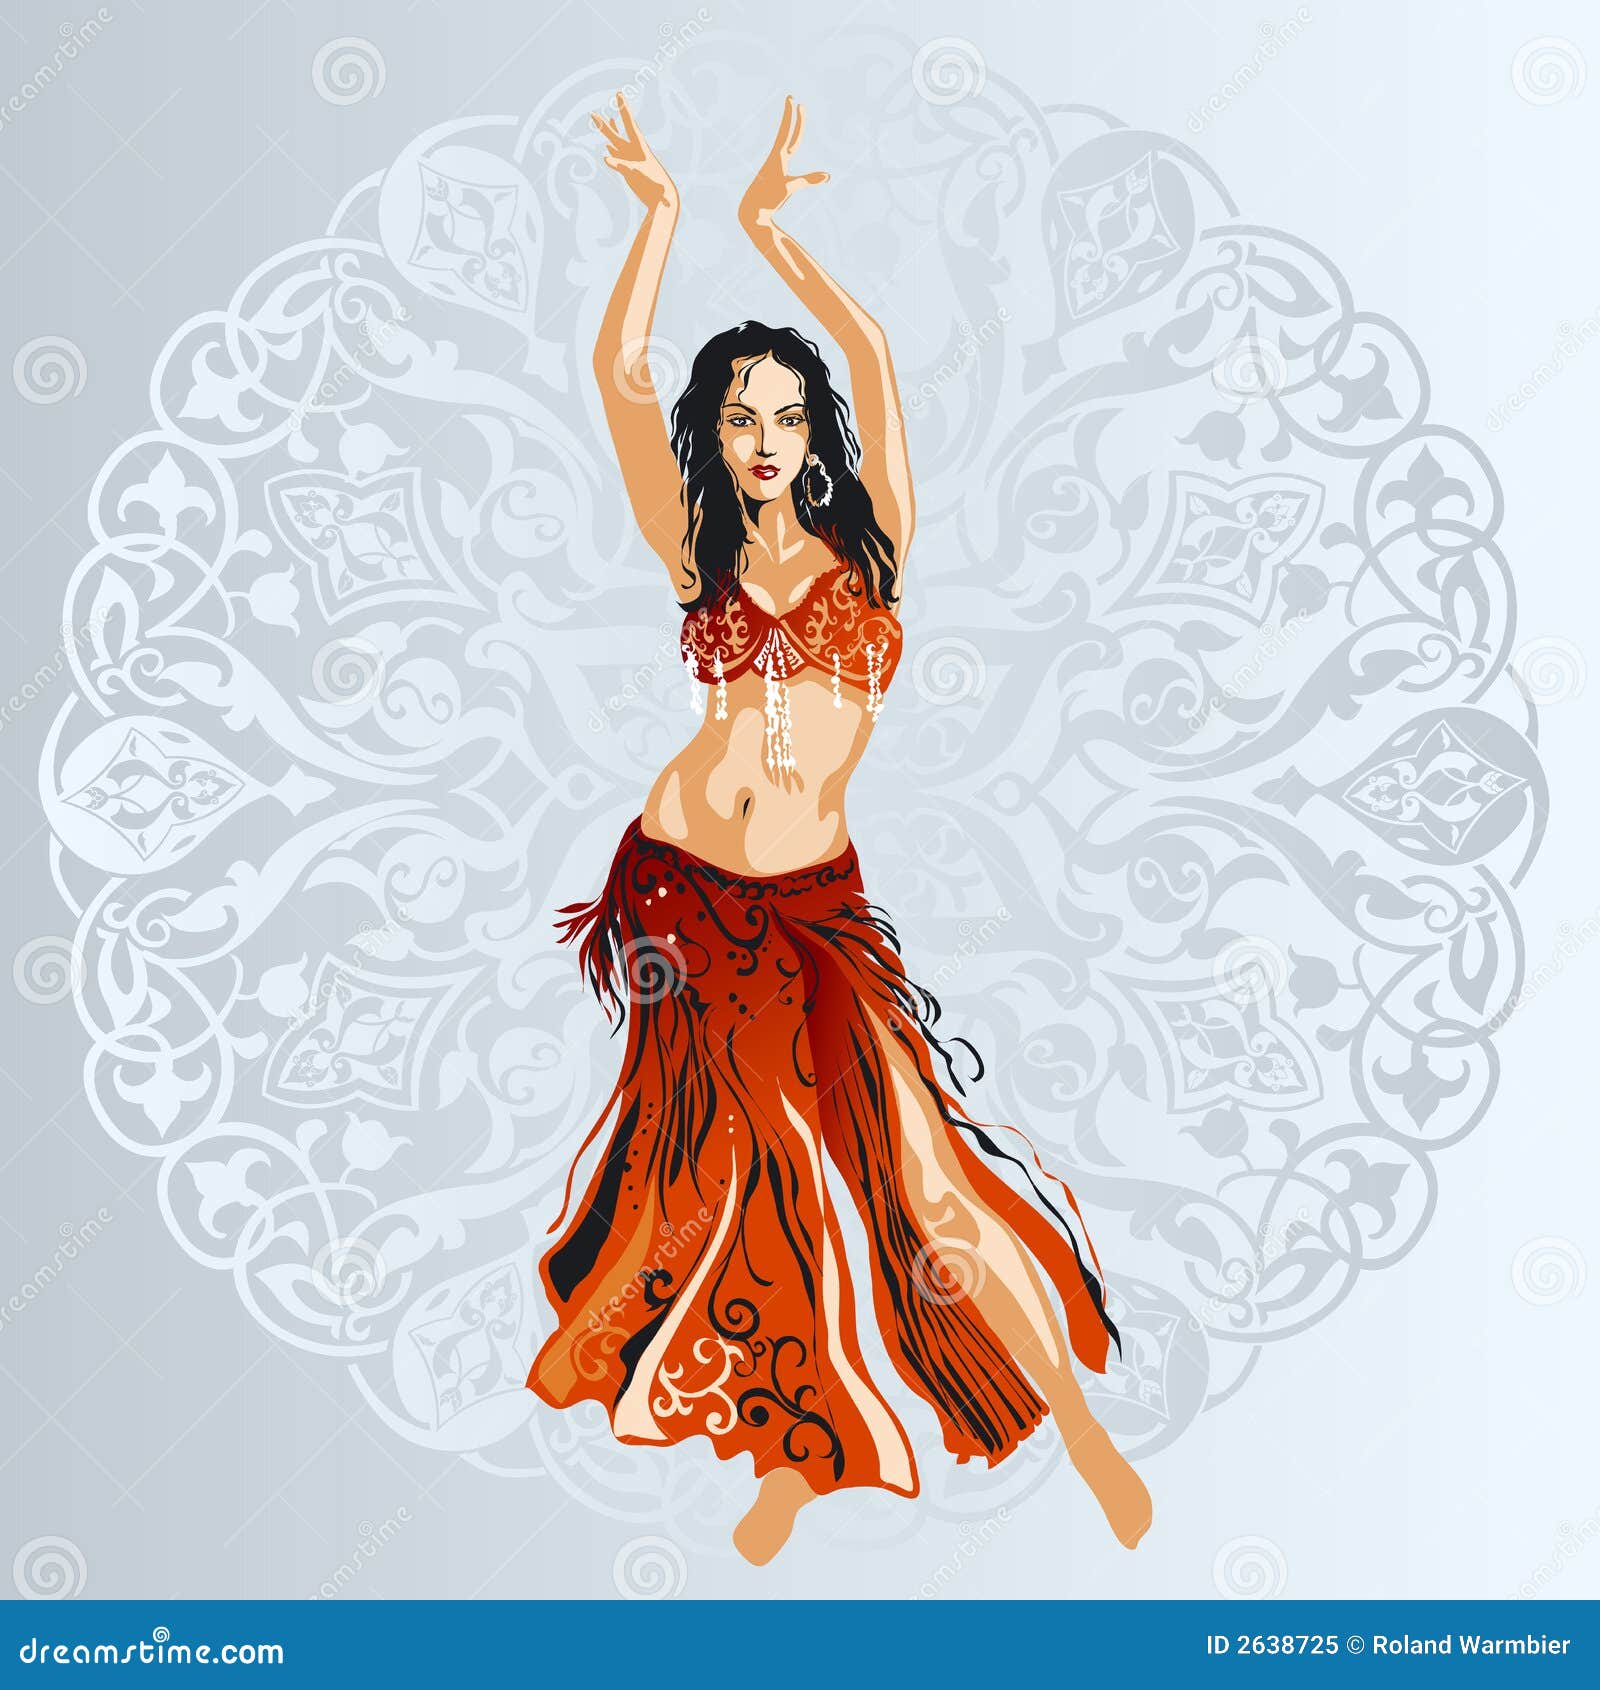 clipart belly dancer - photo #39